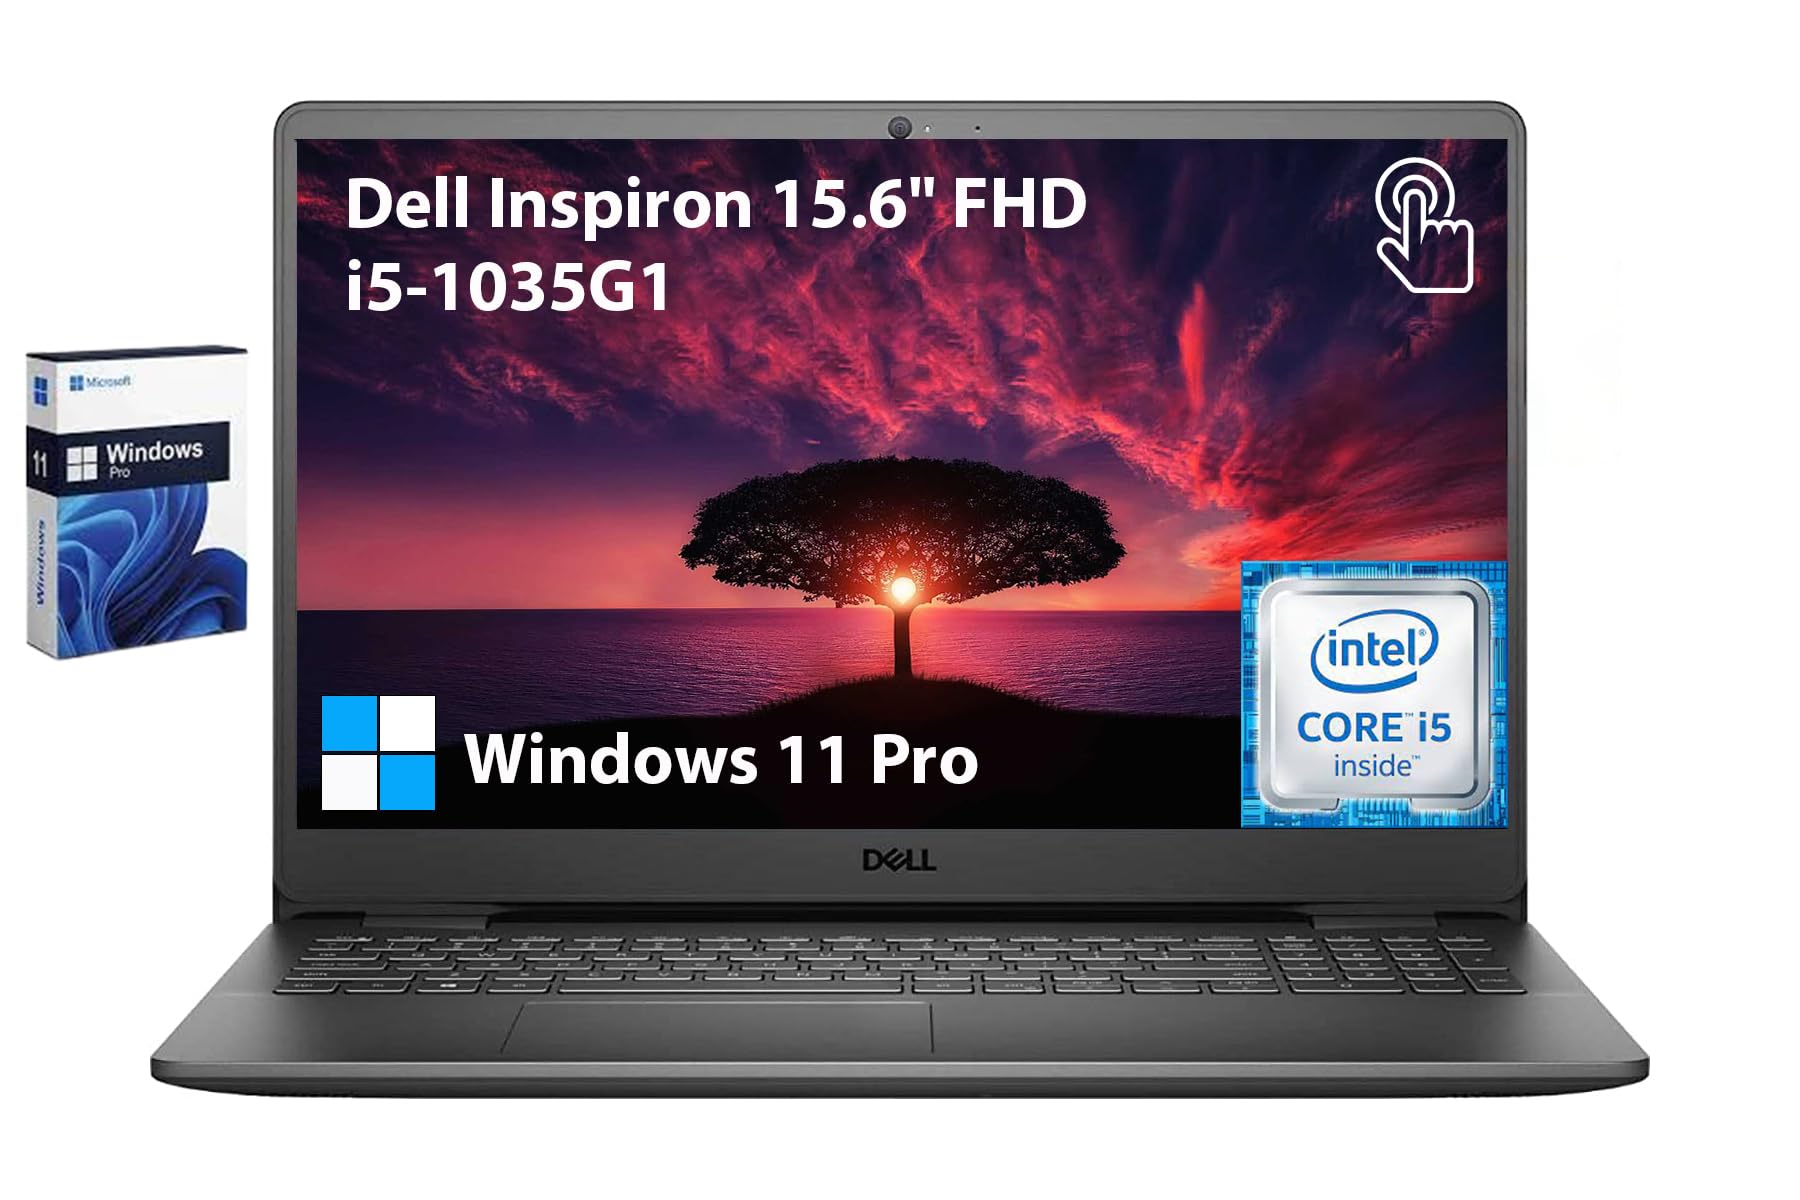 Dell Inspiron 15.6" FHD Touchscreen Business Laptop, Core i5-1035G1 (Beats i7-7500U) Up to 3.6GHz, Windows 11 Pro, 16GB RAM, 1TB SSD, AC WiFi, Bluetooth, Media Card Reader